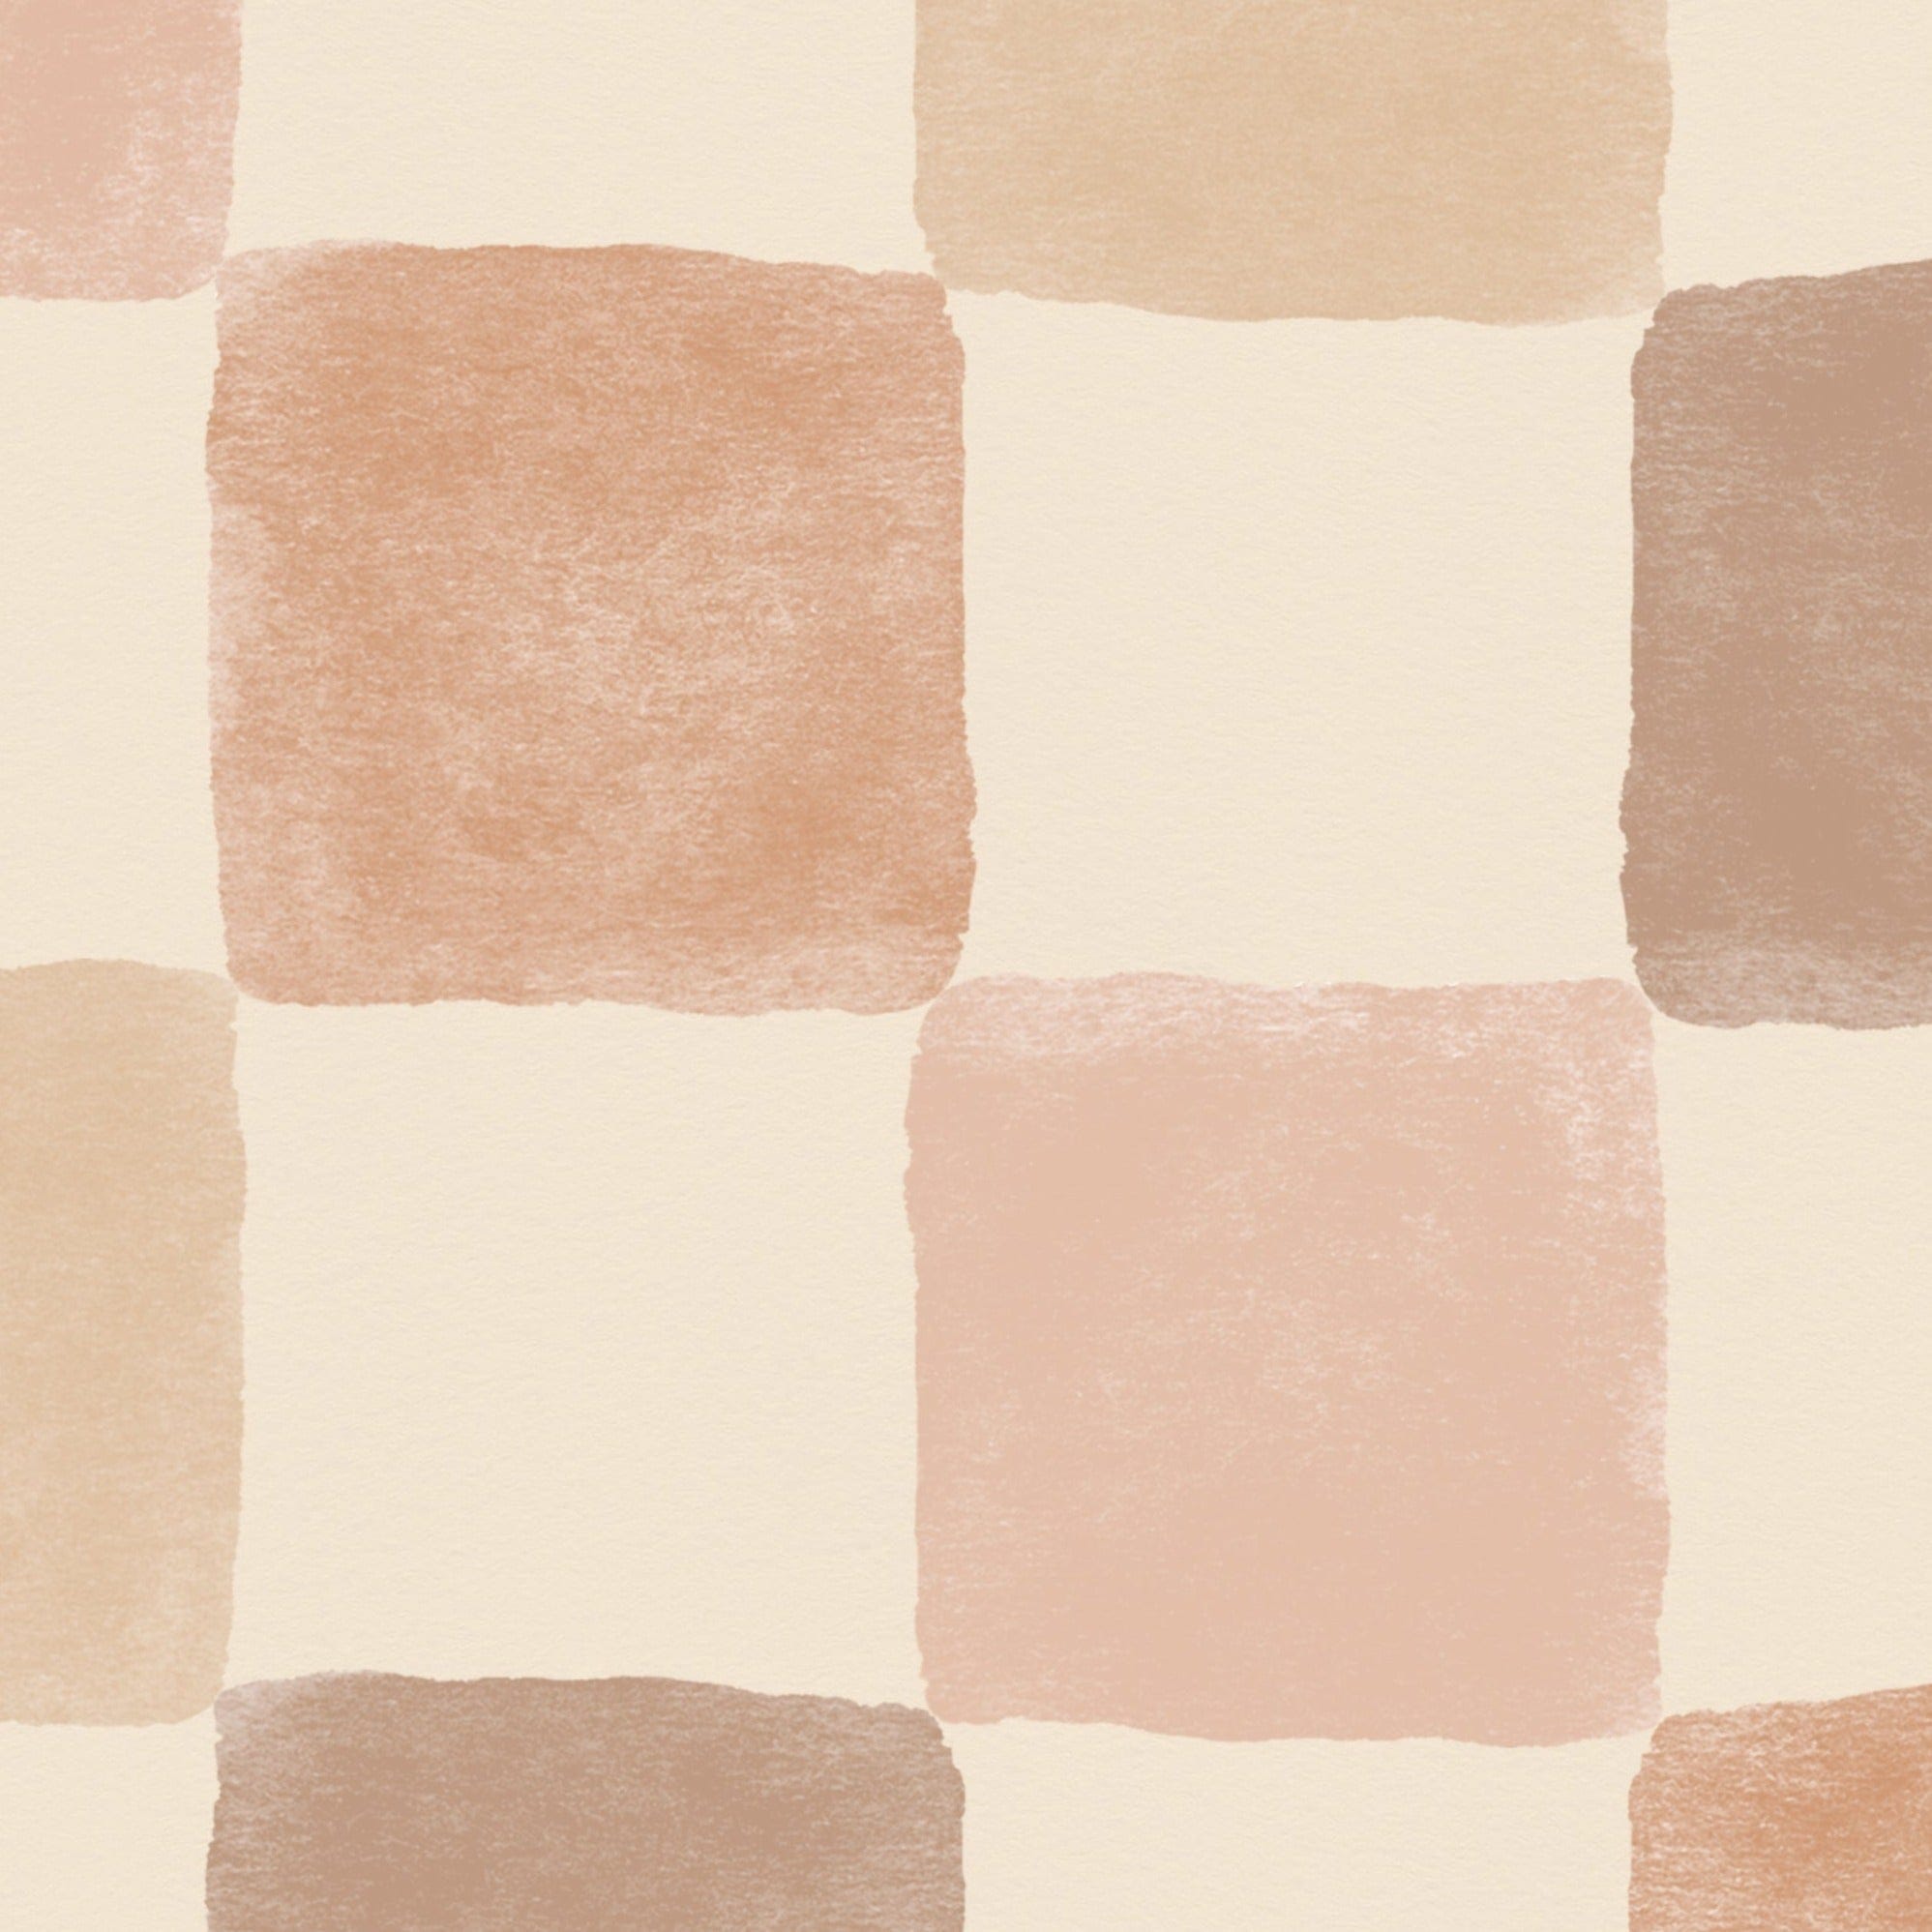 Detailed view of Clémence Wallpaper showcasing a checkered pattern with soft, watercolor blocks in shades of peach, taupe, and beige, set against a light cream background, exuding a warm and inviting feel